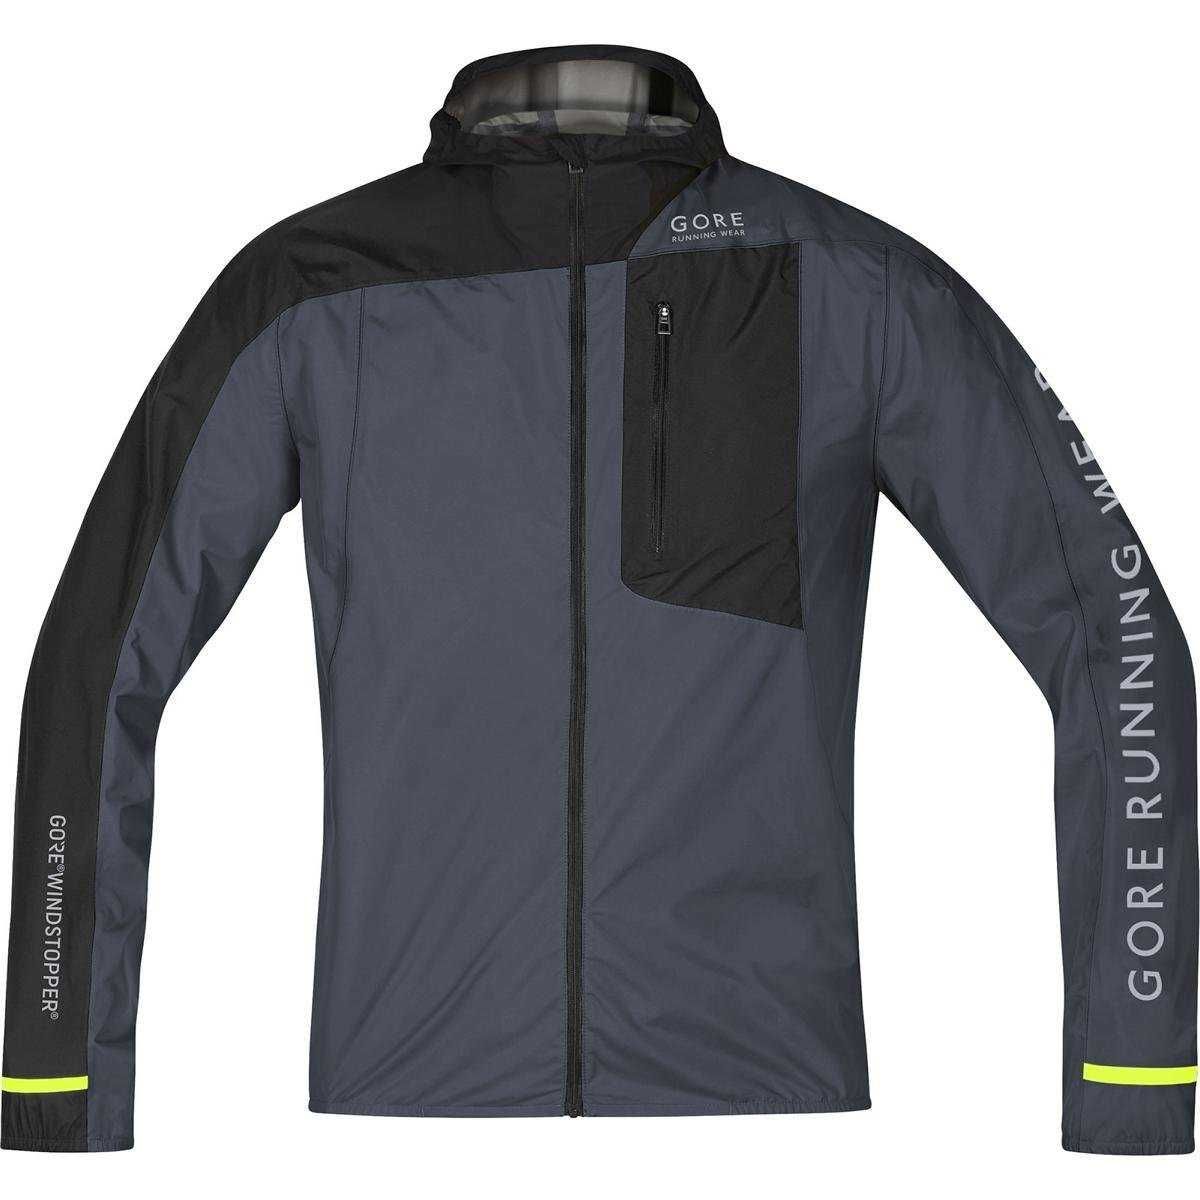 Fusion Windstopper® Active Shell Jacket - Graphite Grey/Black